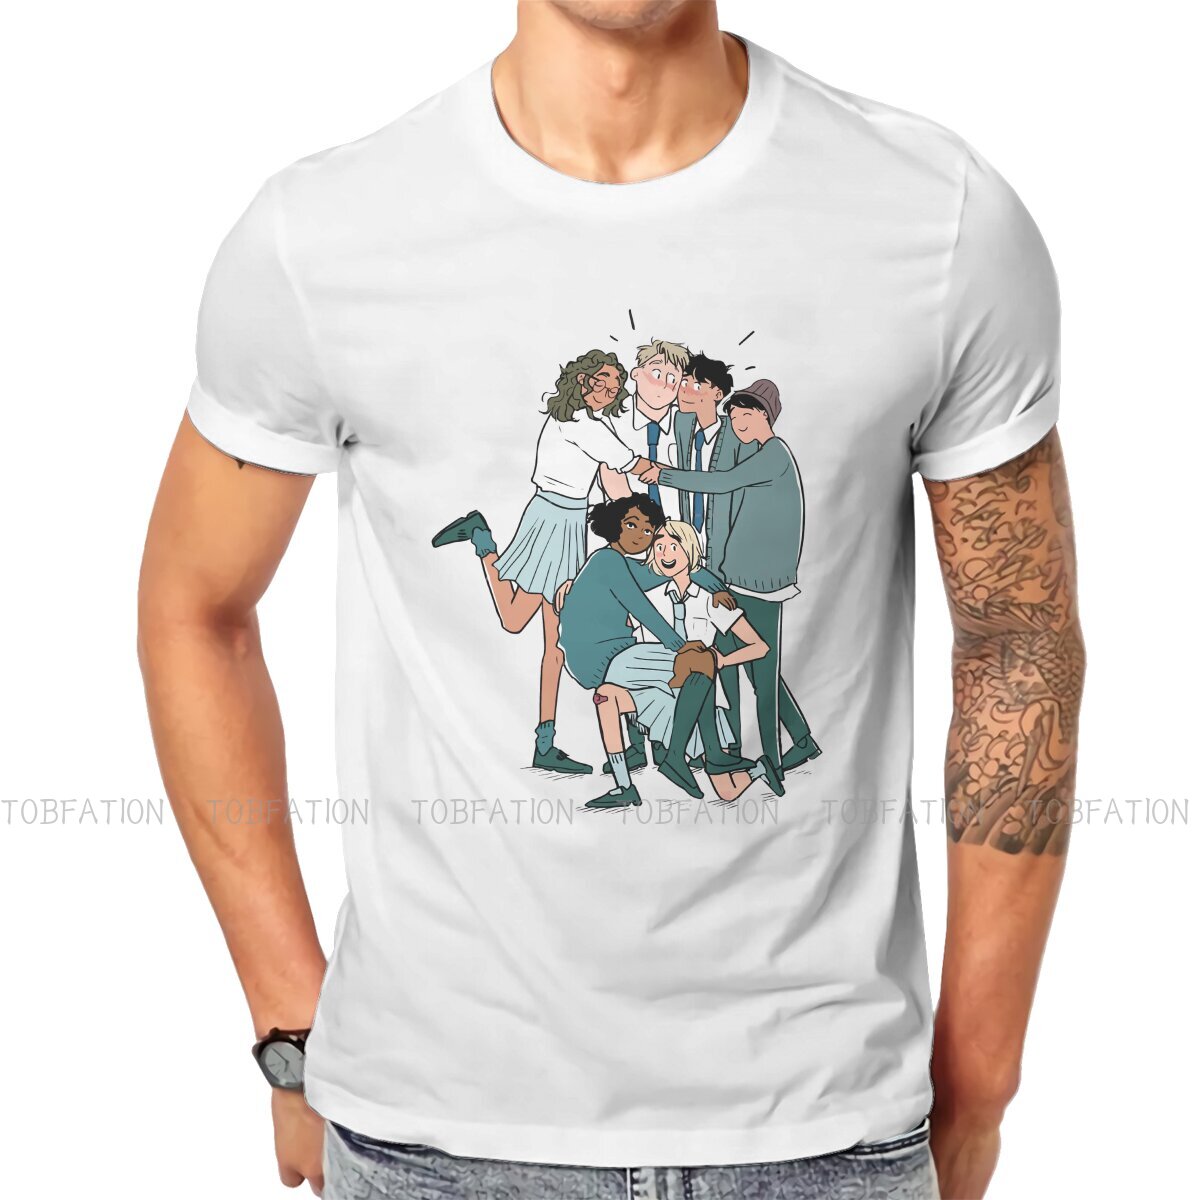 All Hipster TShirts Alice Oseman Heartstopper Comic Men Style Fabric Tops T Shirt Round Neck Big Size